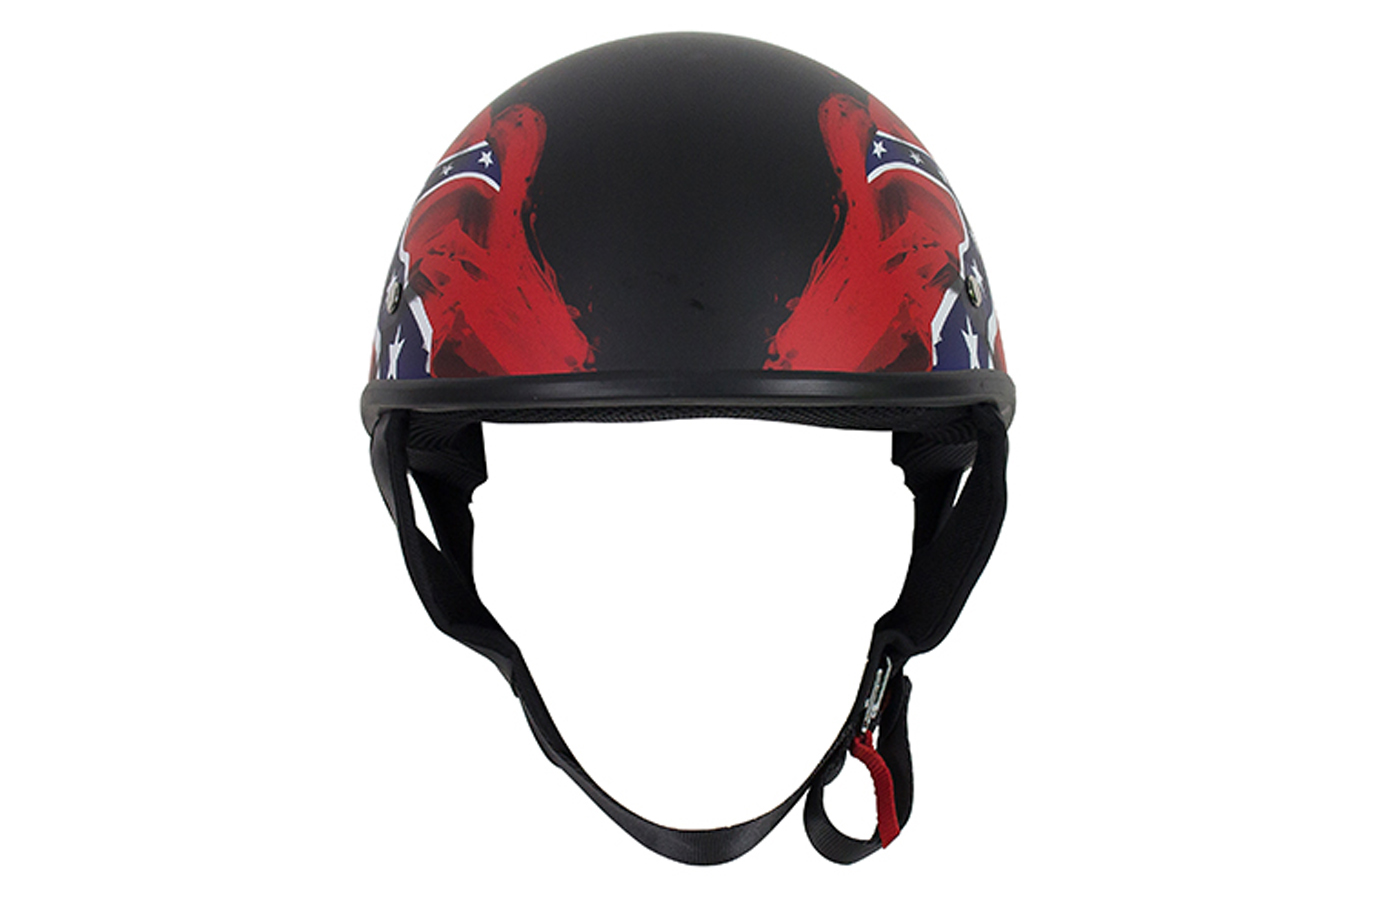 MOTORCYCLE NOVELTY HELMET SIZES SMALL TO XL ~ R-E-B-E-L ~ SALE SAVE $$$  {501} 